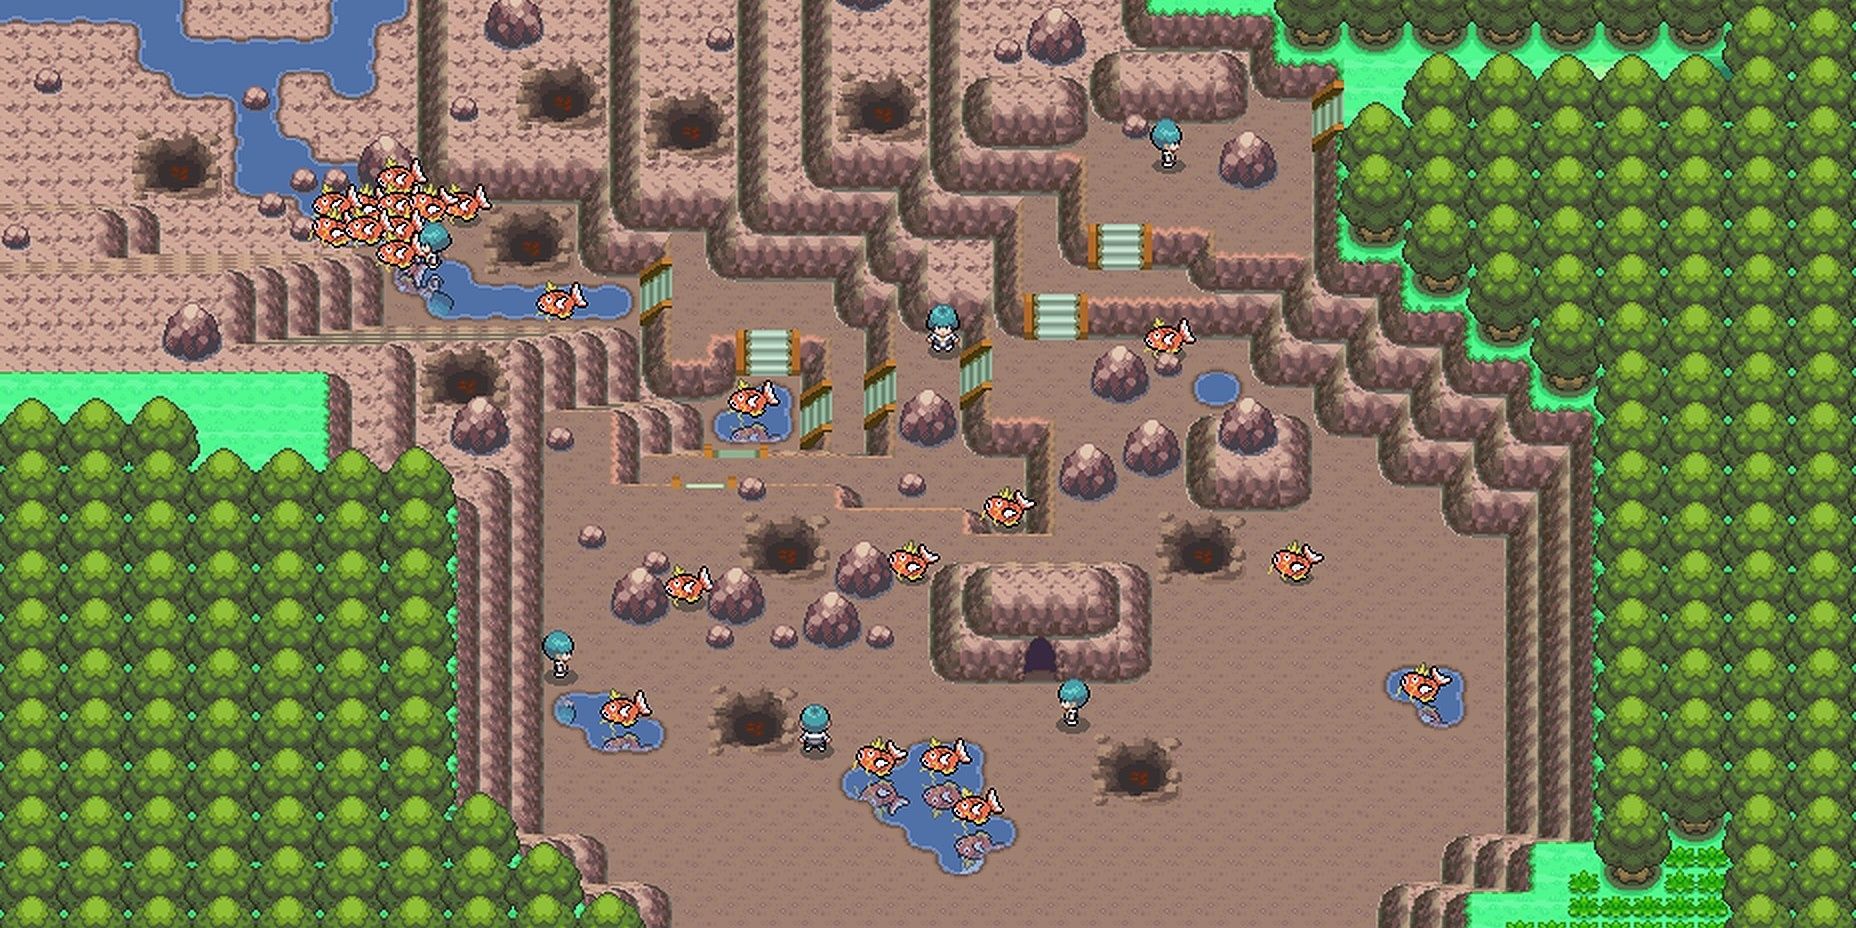 Lake Valor after it is blown up in Pokemon Platinum